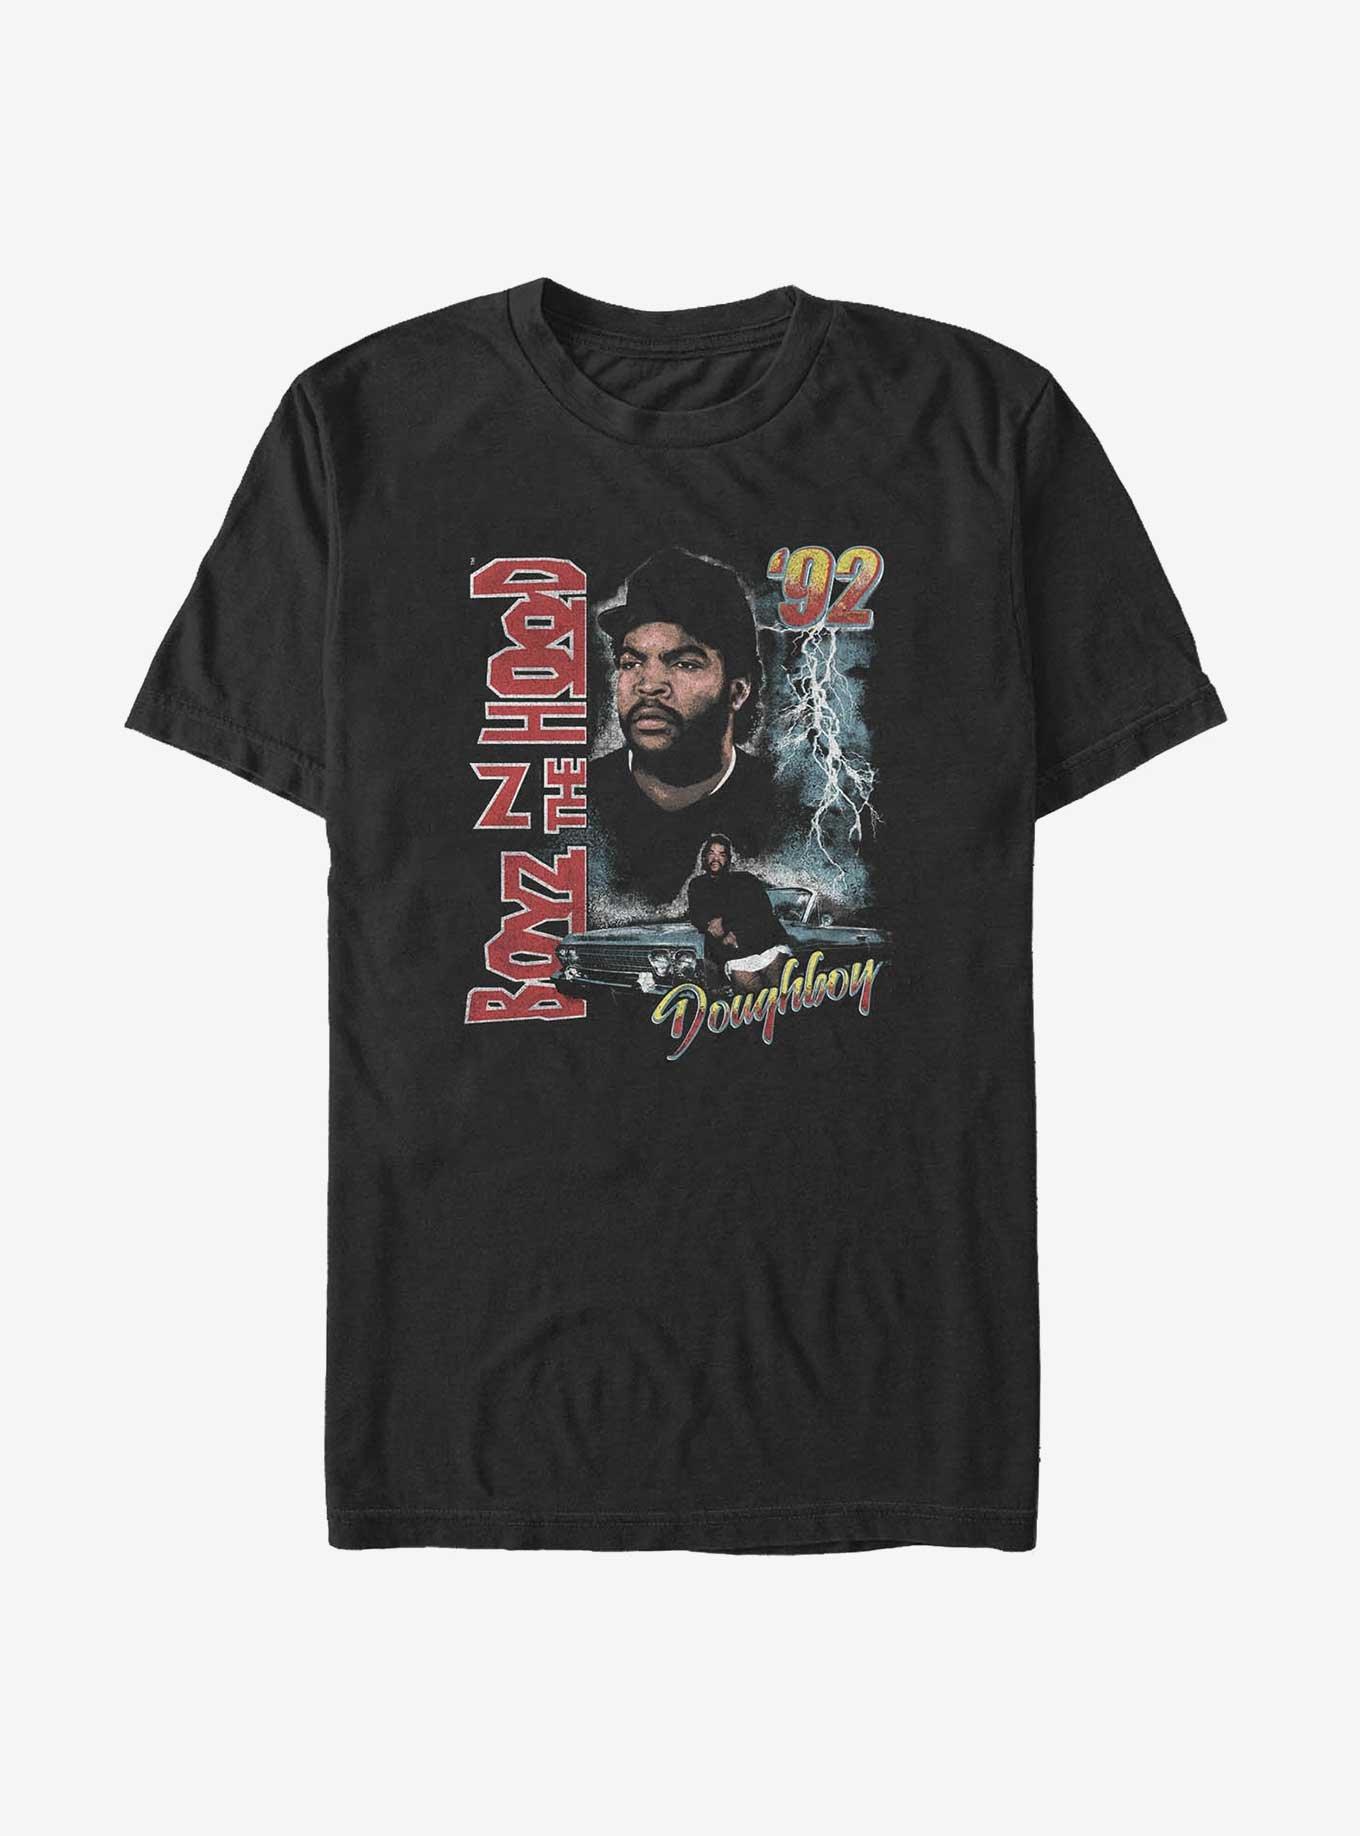 Boyz N The Hood Men's Officially Licensed Ice Cube Graphic Tee T-Shirt (Medium/Large, Brown), Size: Medium-Large